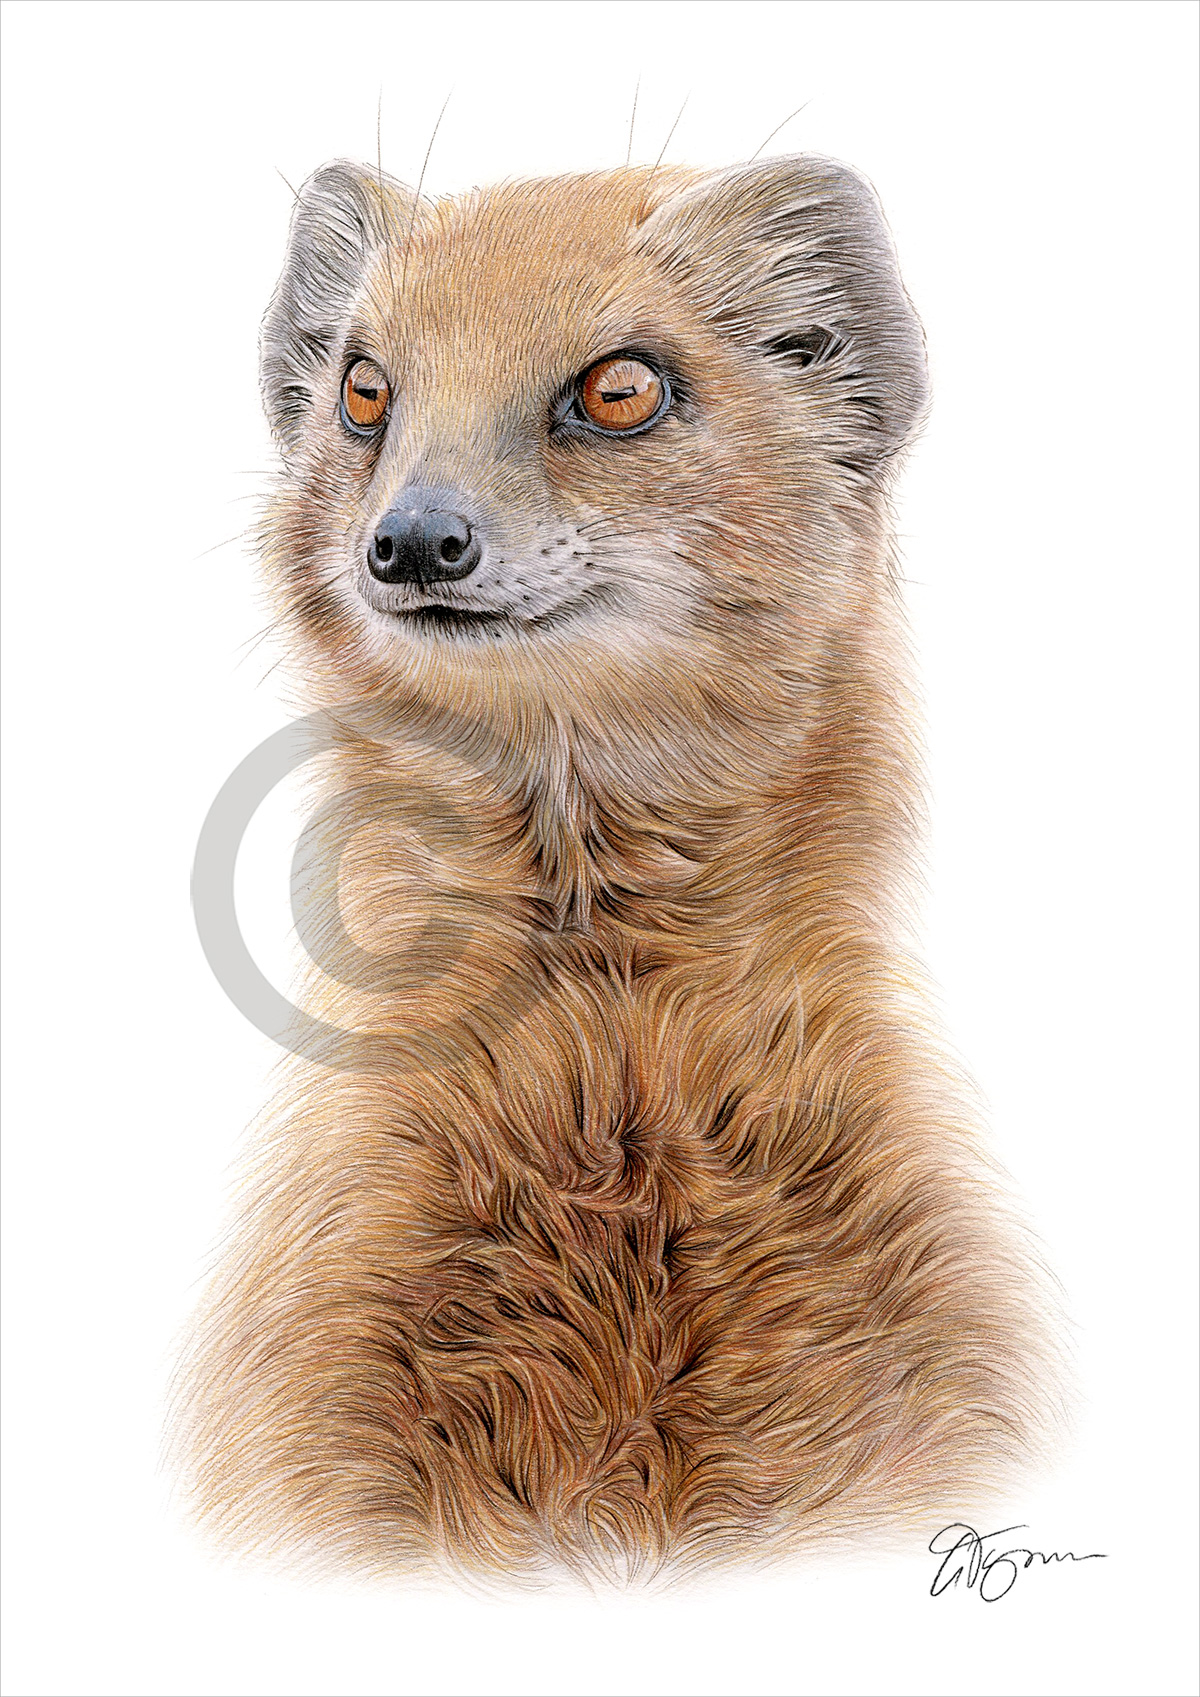 Colour pencil drawing of a mongoose by artist Gary Tymon